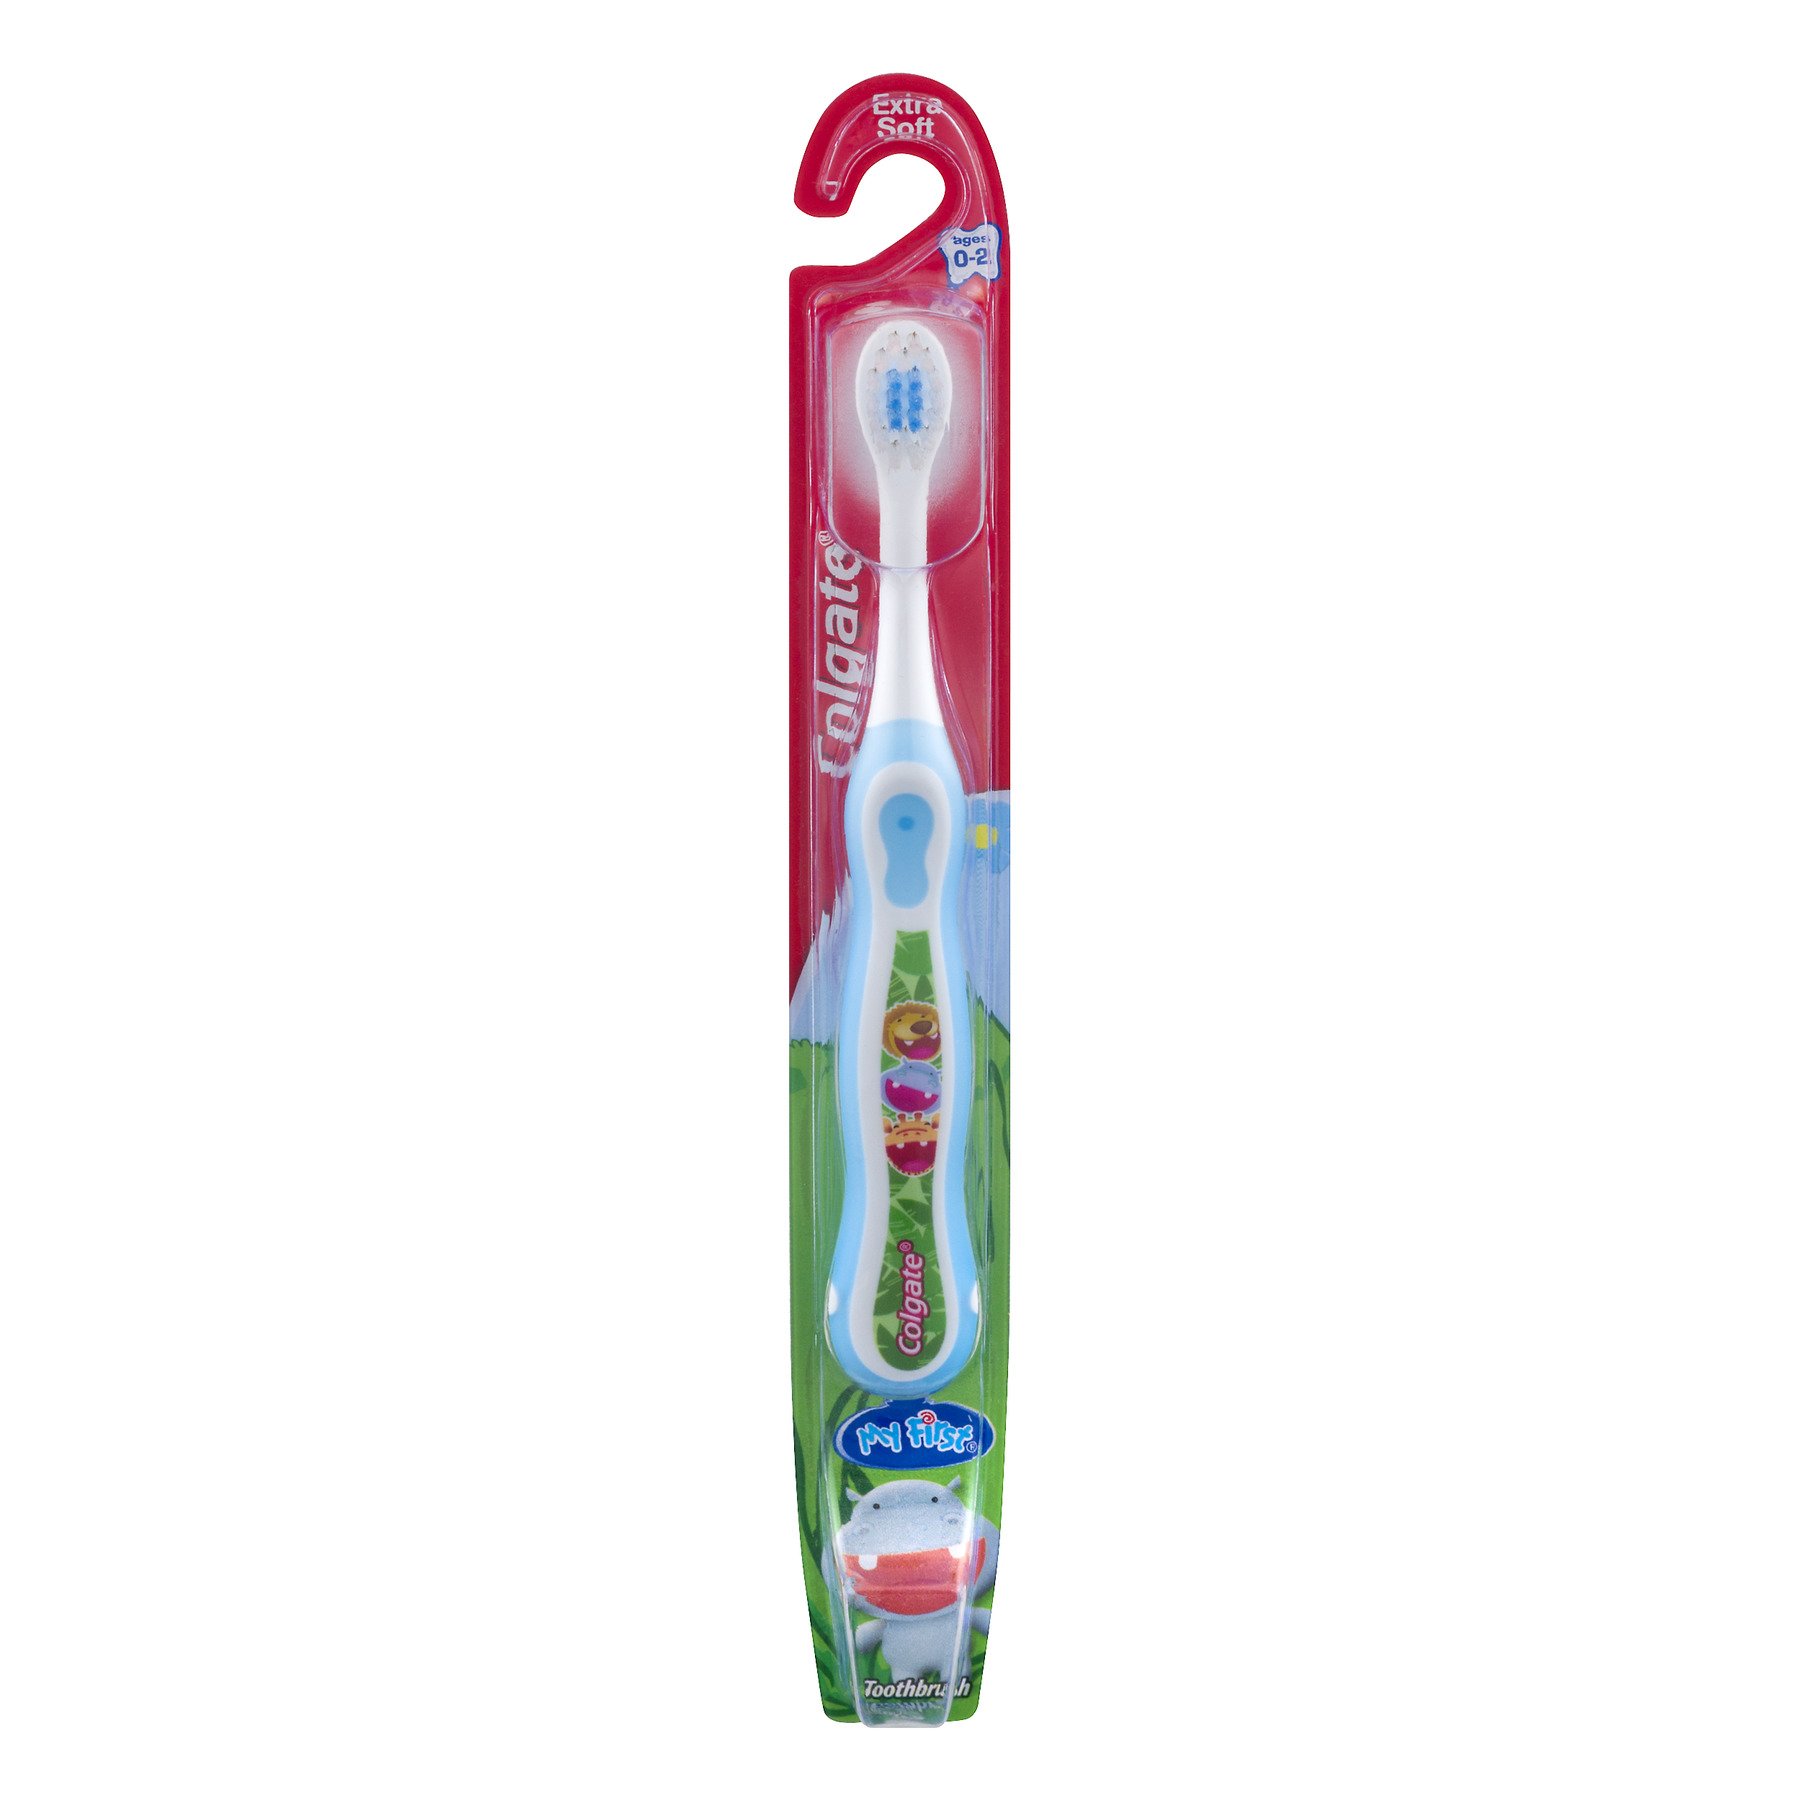 Colgate Kids My First Toothbrush, Soft, Ages 0-2 (colors vary) 1 ea